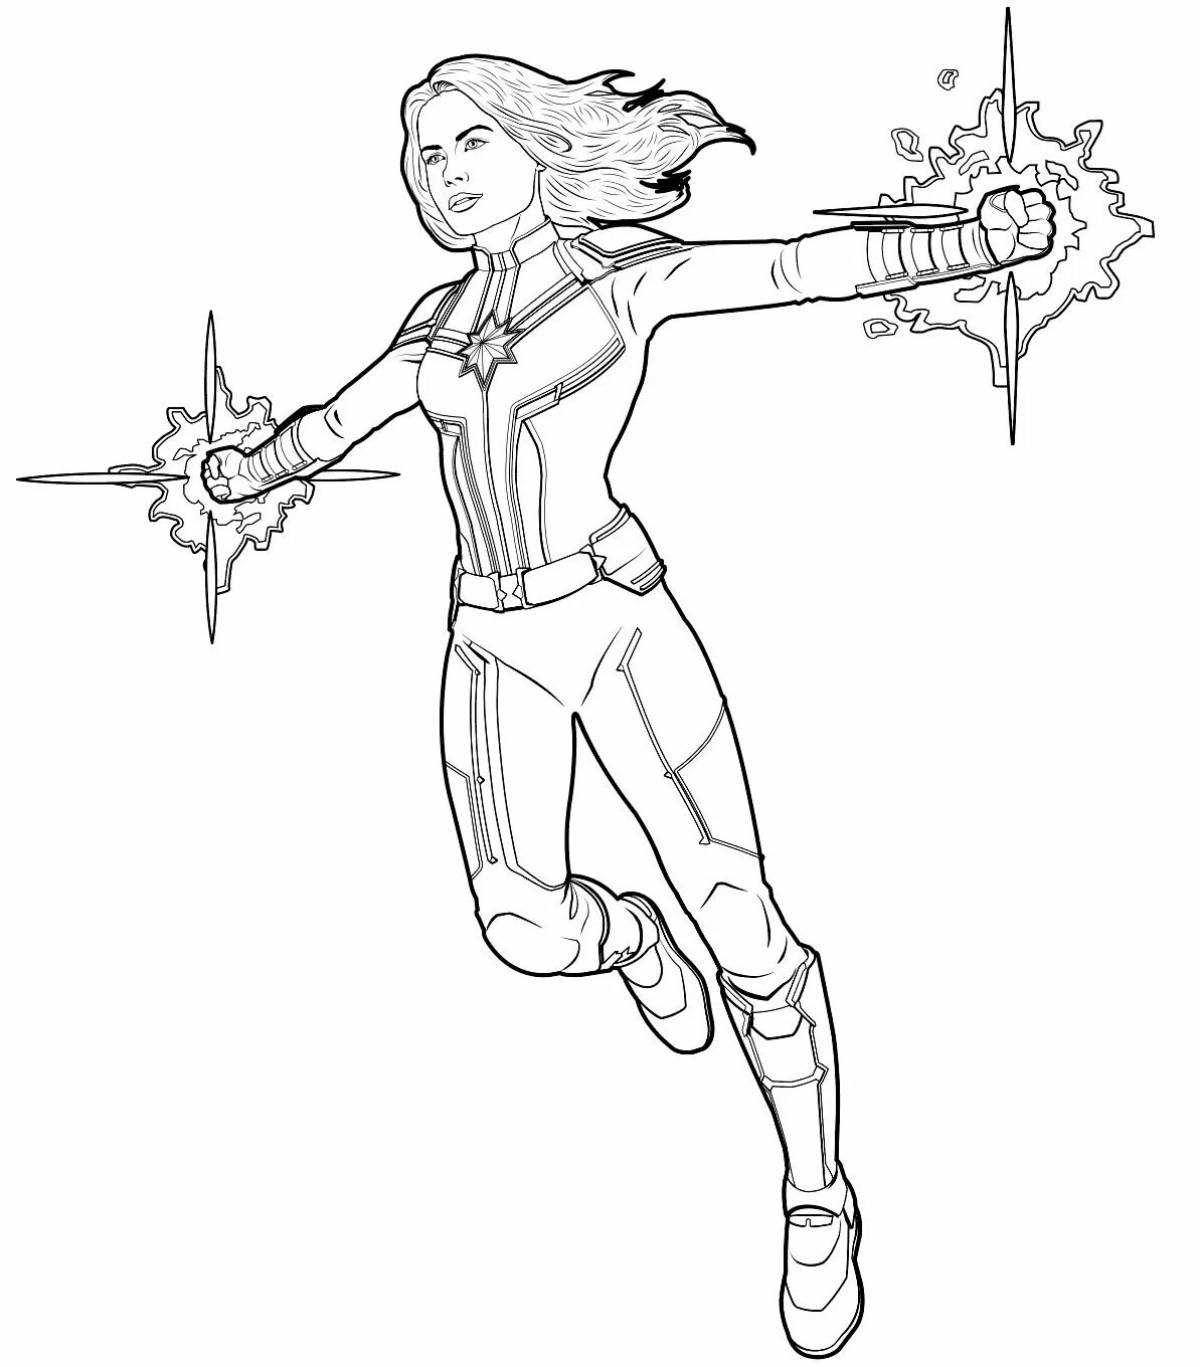 Exotic captain marvel coloring page